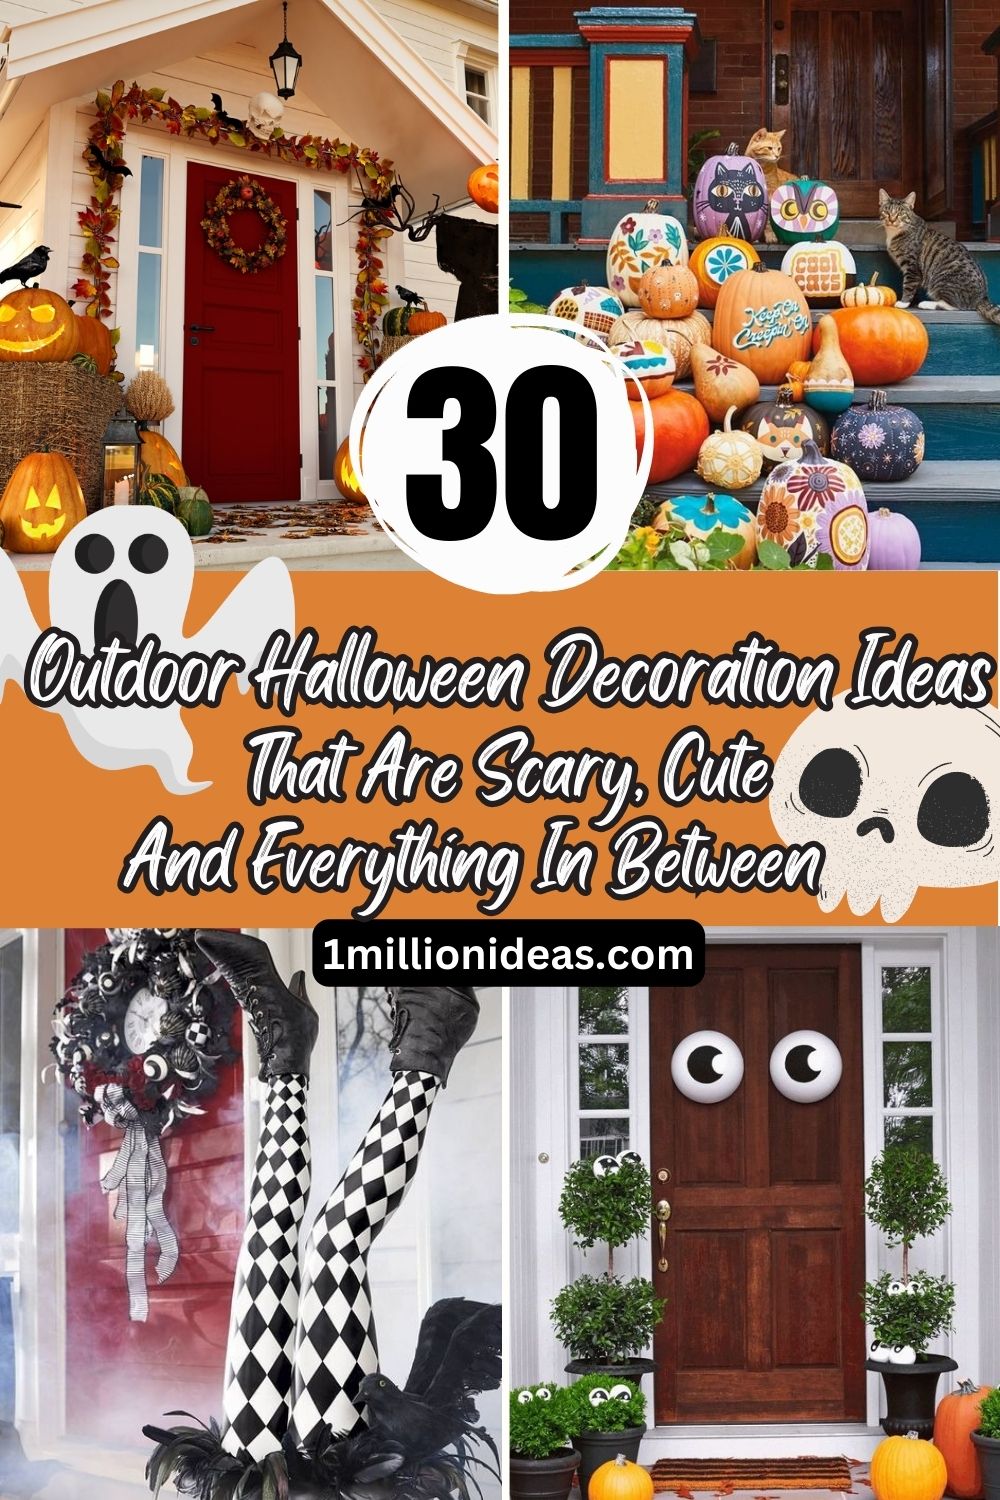 30 Outdoor Halloween Decoration Ideas That Are Scary, Cute, And Everything In Between